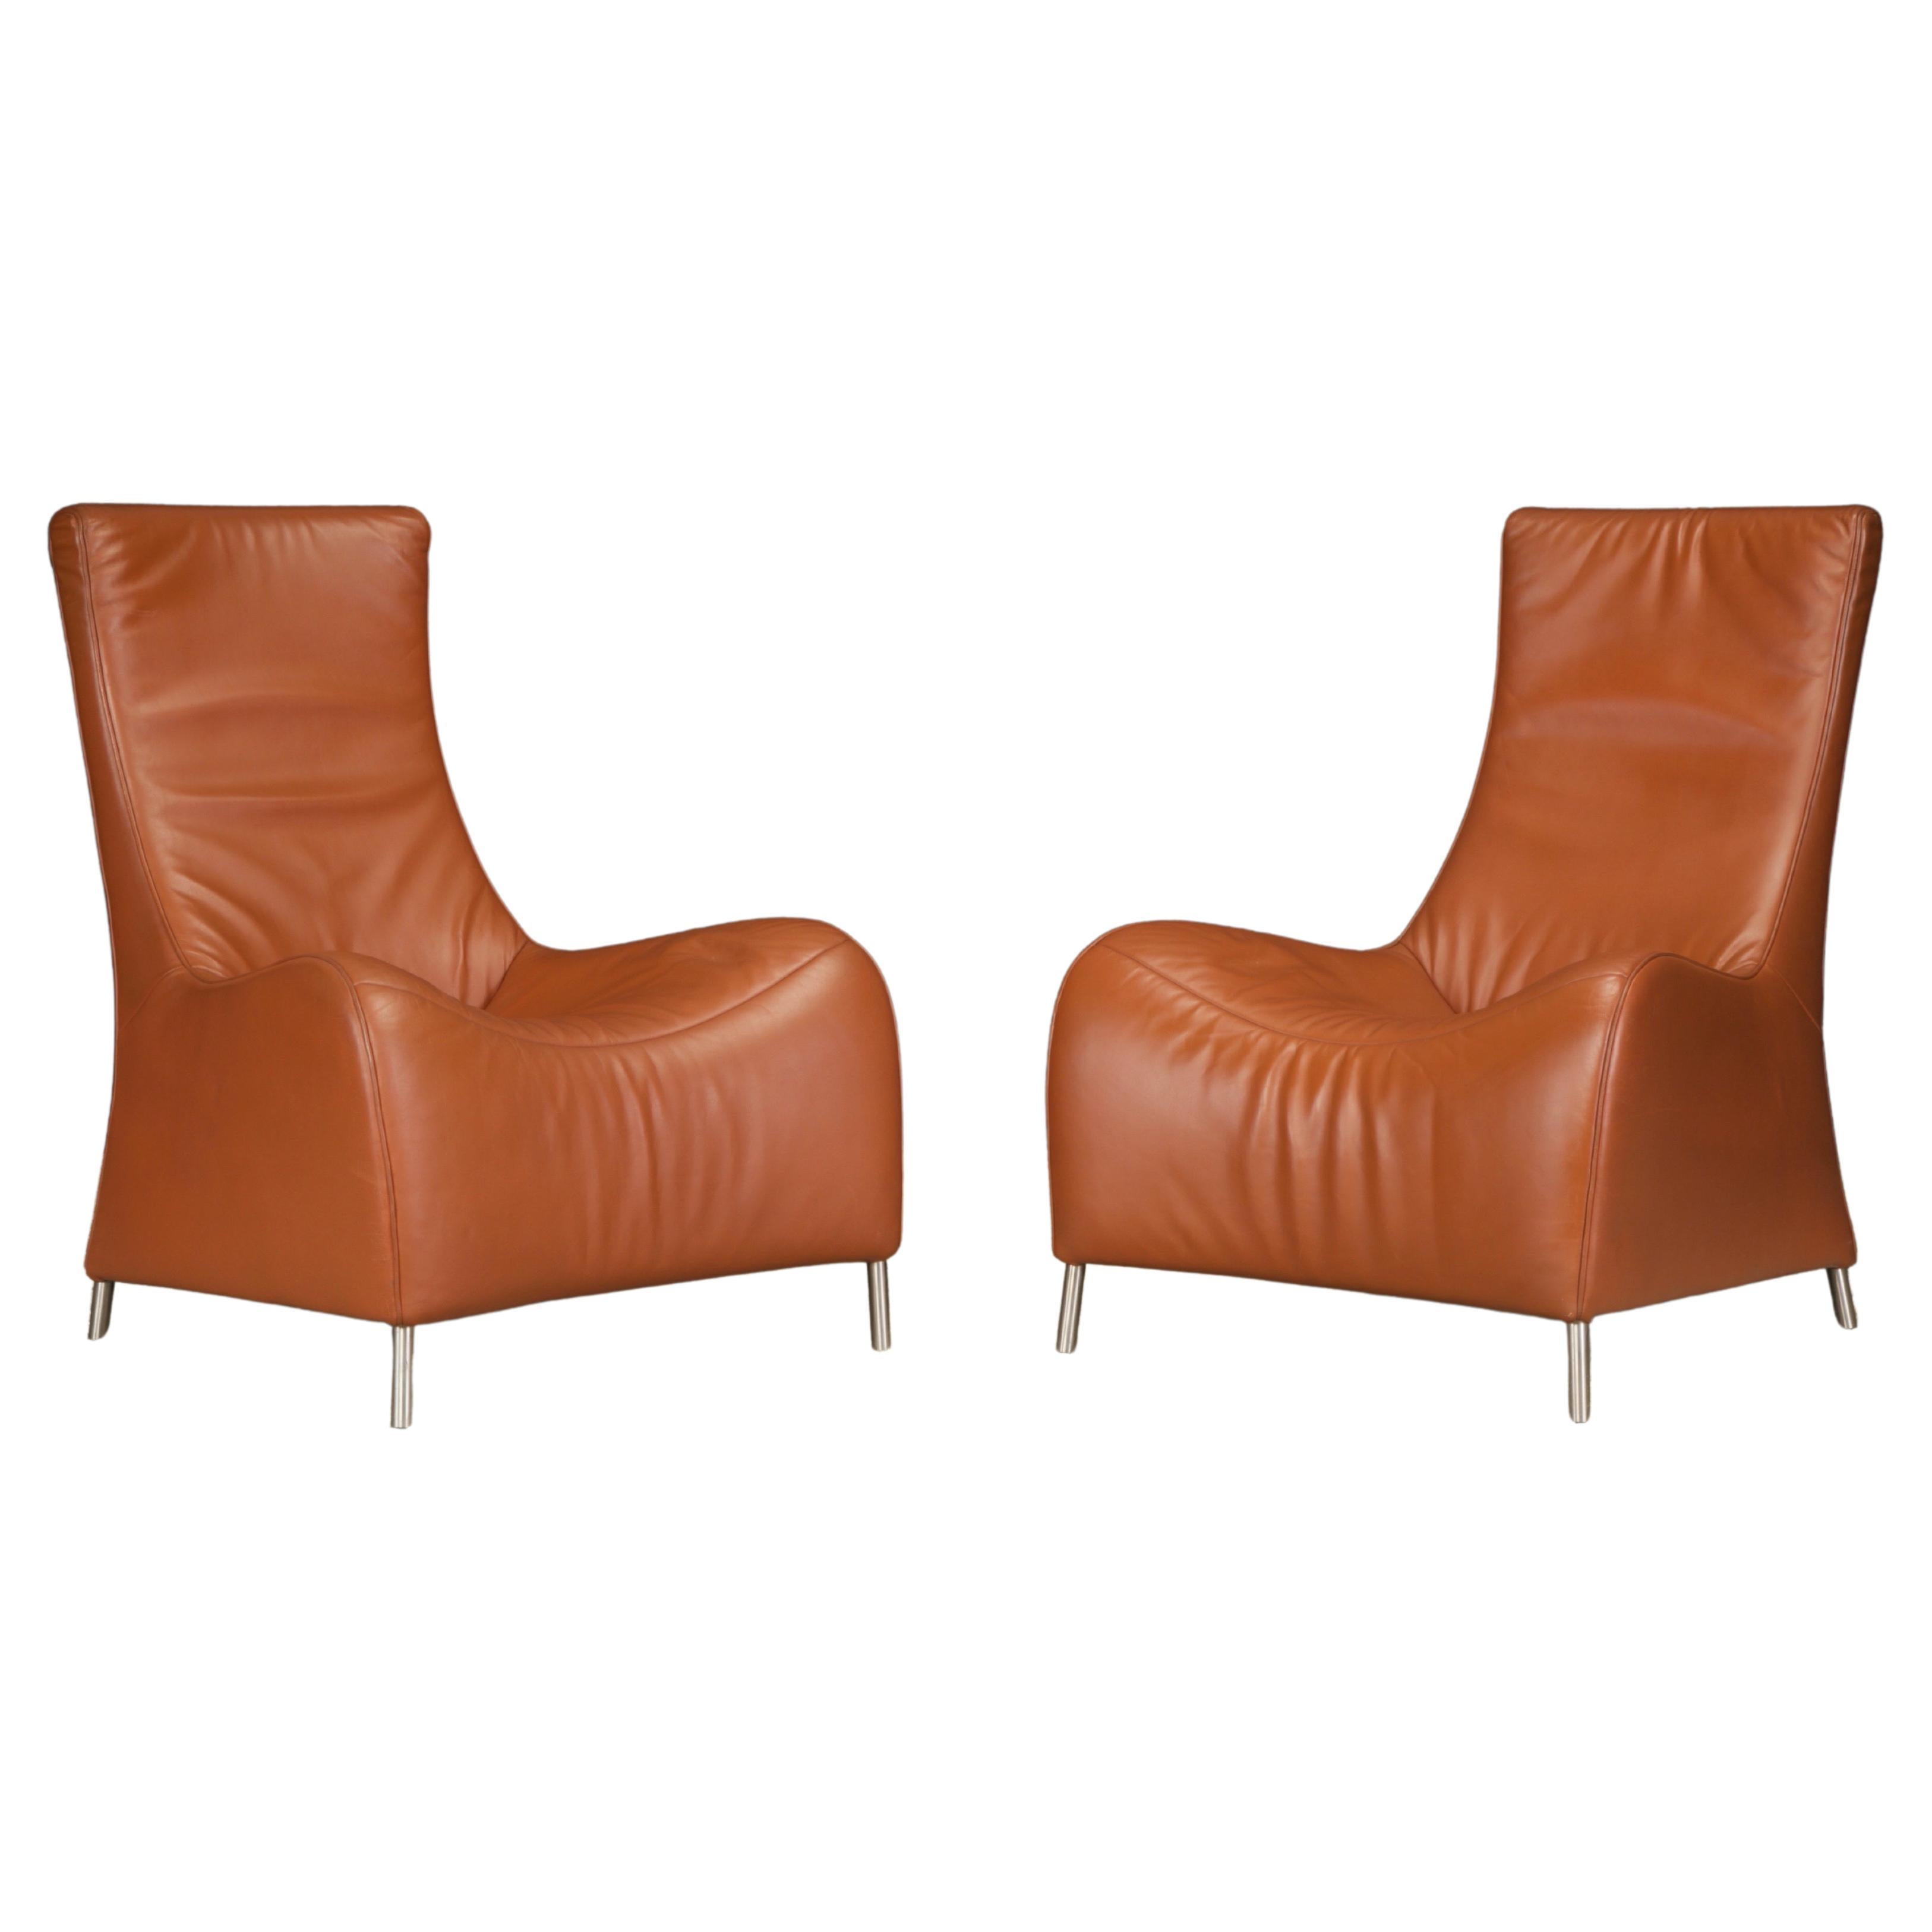 Cognac Leather Lounge Chairs by Mathias Hoffmann for De Sede, 1980s, Signed For Sale